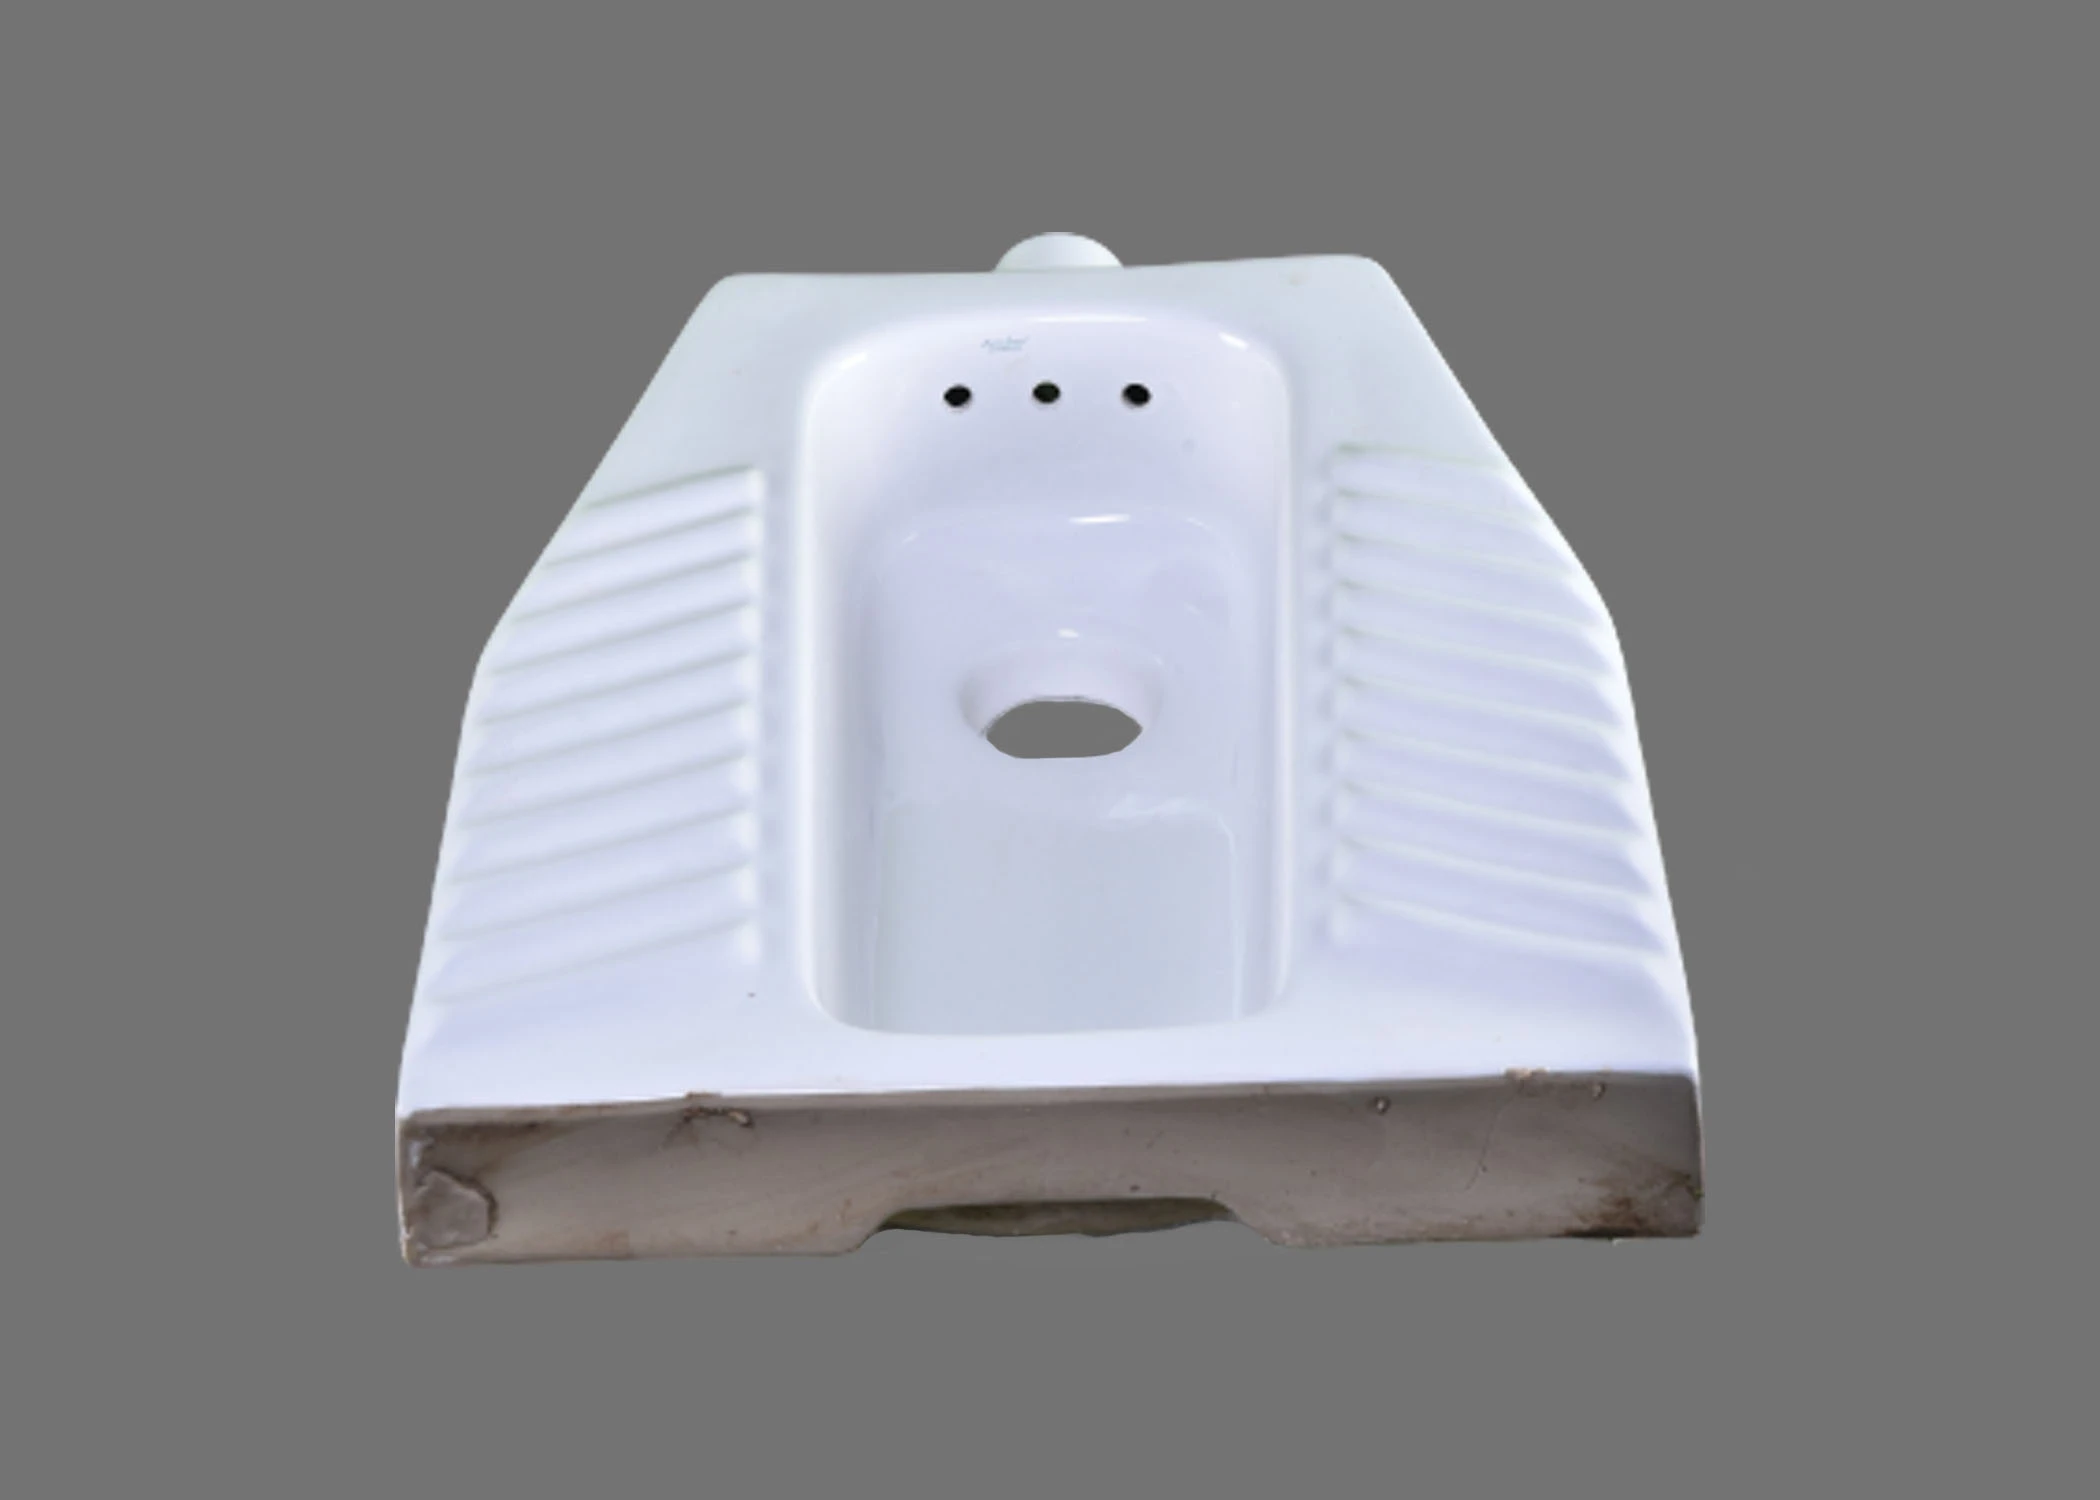 TOP QUALITY  Toliet Ceramic Squating Pan Wc   Lebenese Squatting Pan Water Closet Toilet IN;7903232